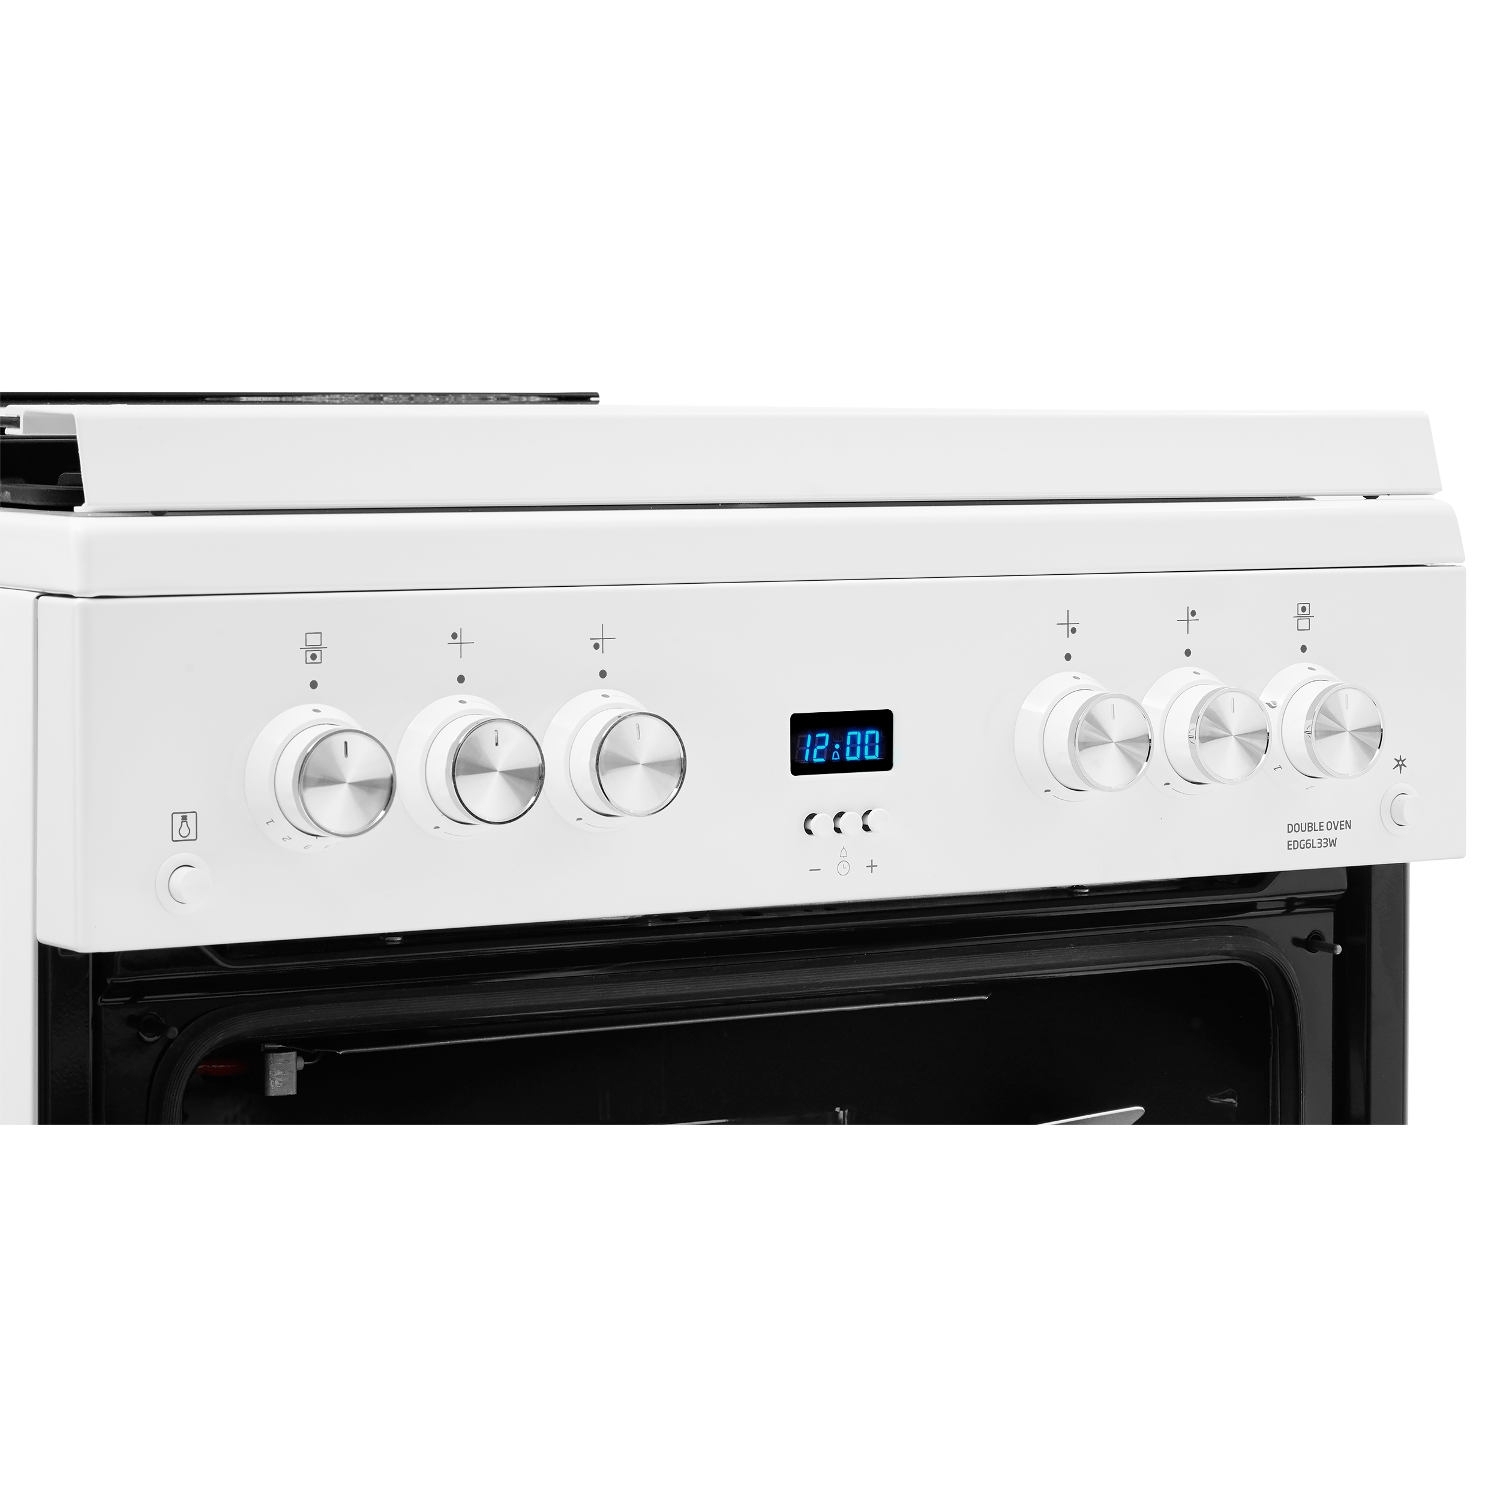 Beko EDG6L33W 60cm Gas Double Oven with Glass Lid - White - 6